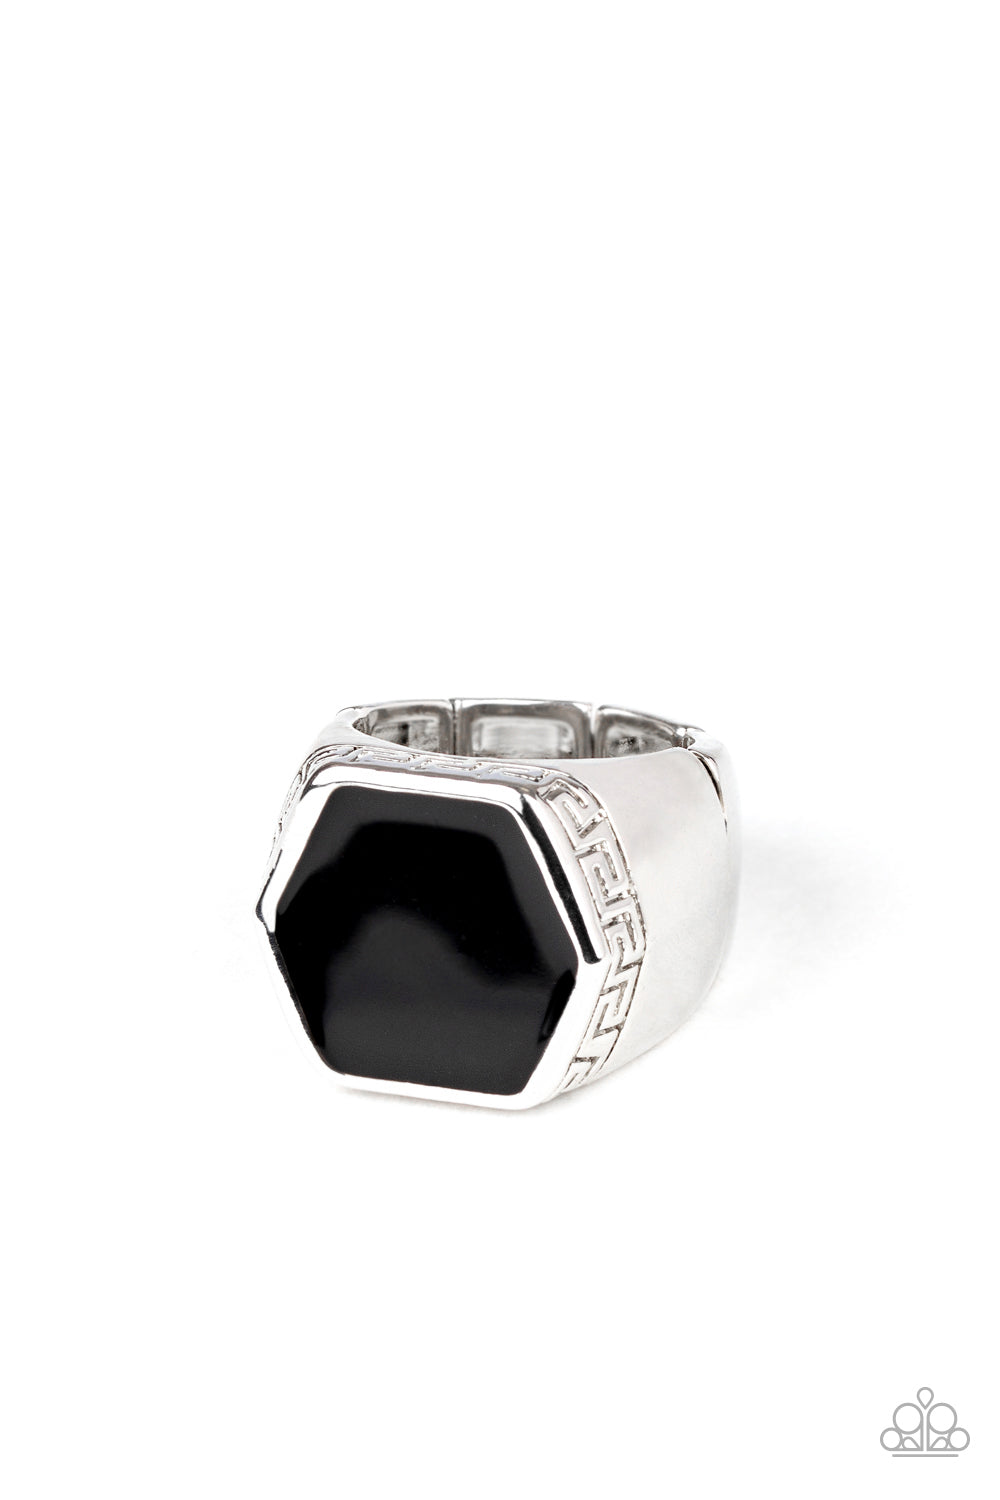 HEX Out - Black Ring